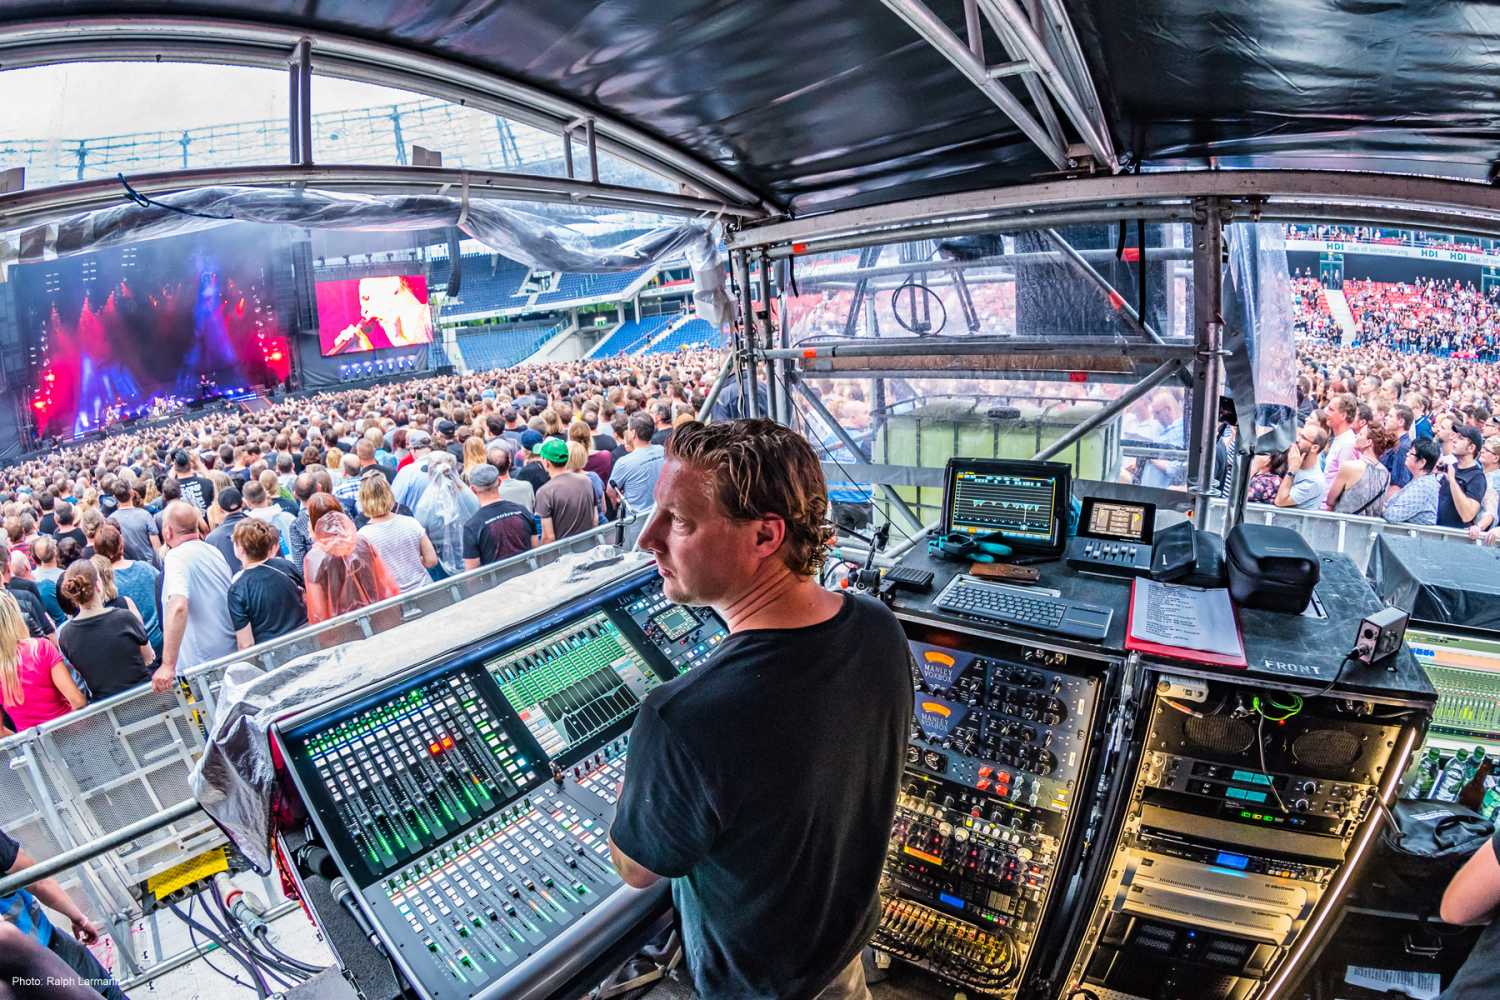 Antony King in the FOH position with an SSL L500 Live console